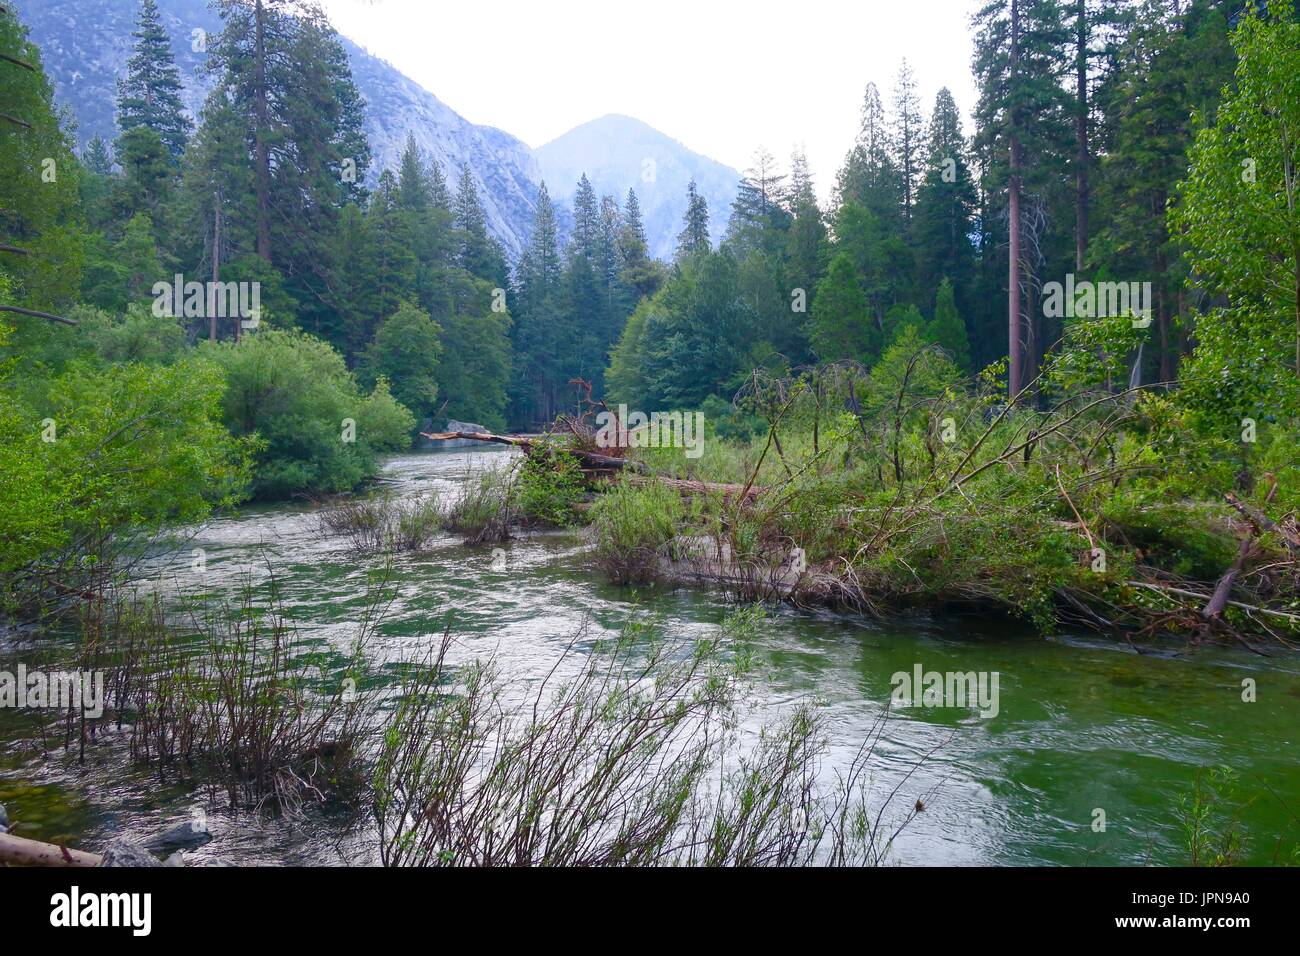 Bend in the King's River, Kings Canyon National Park, California, United States Stock Photo